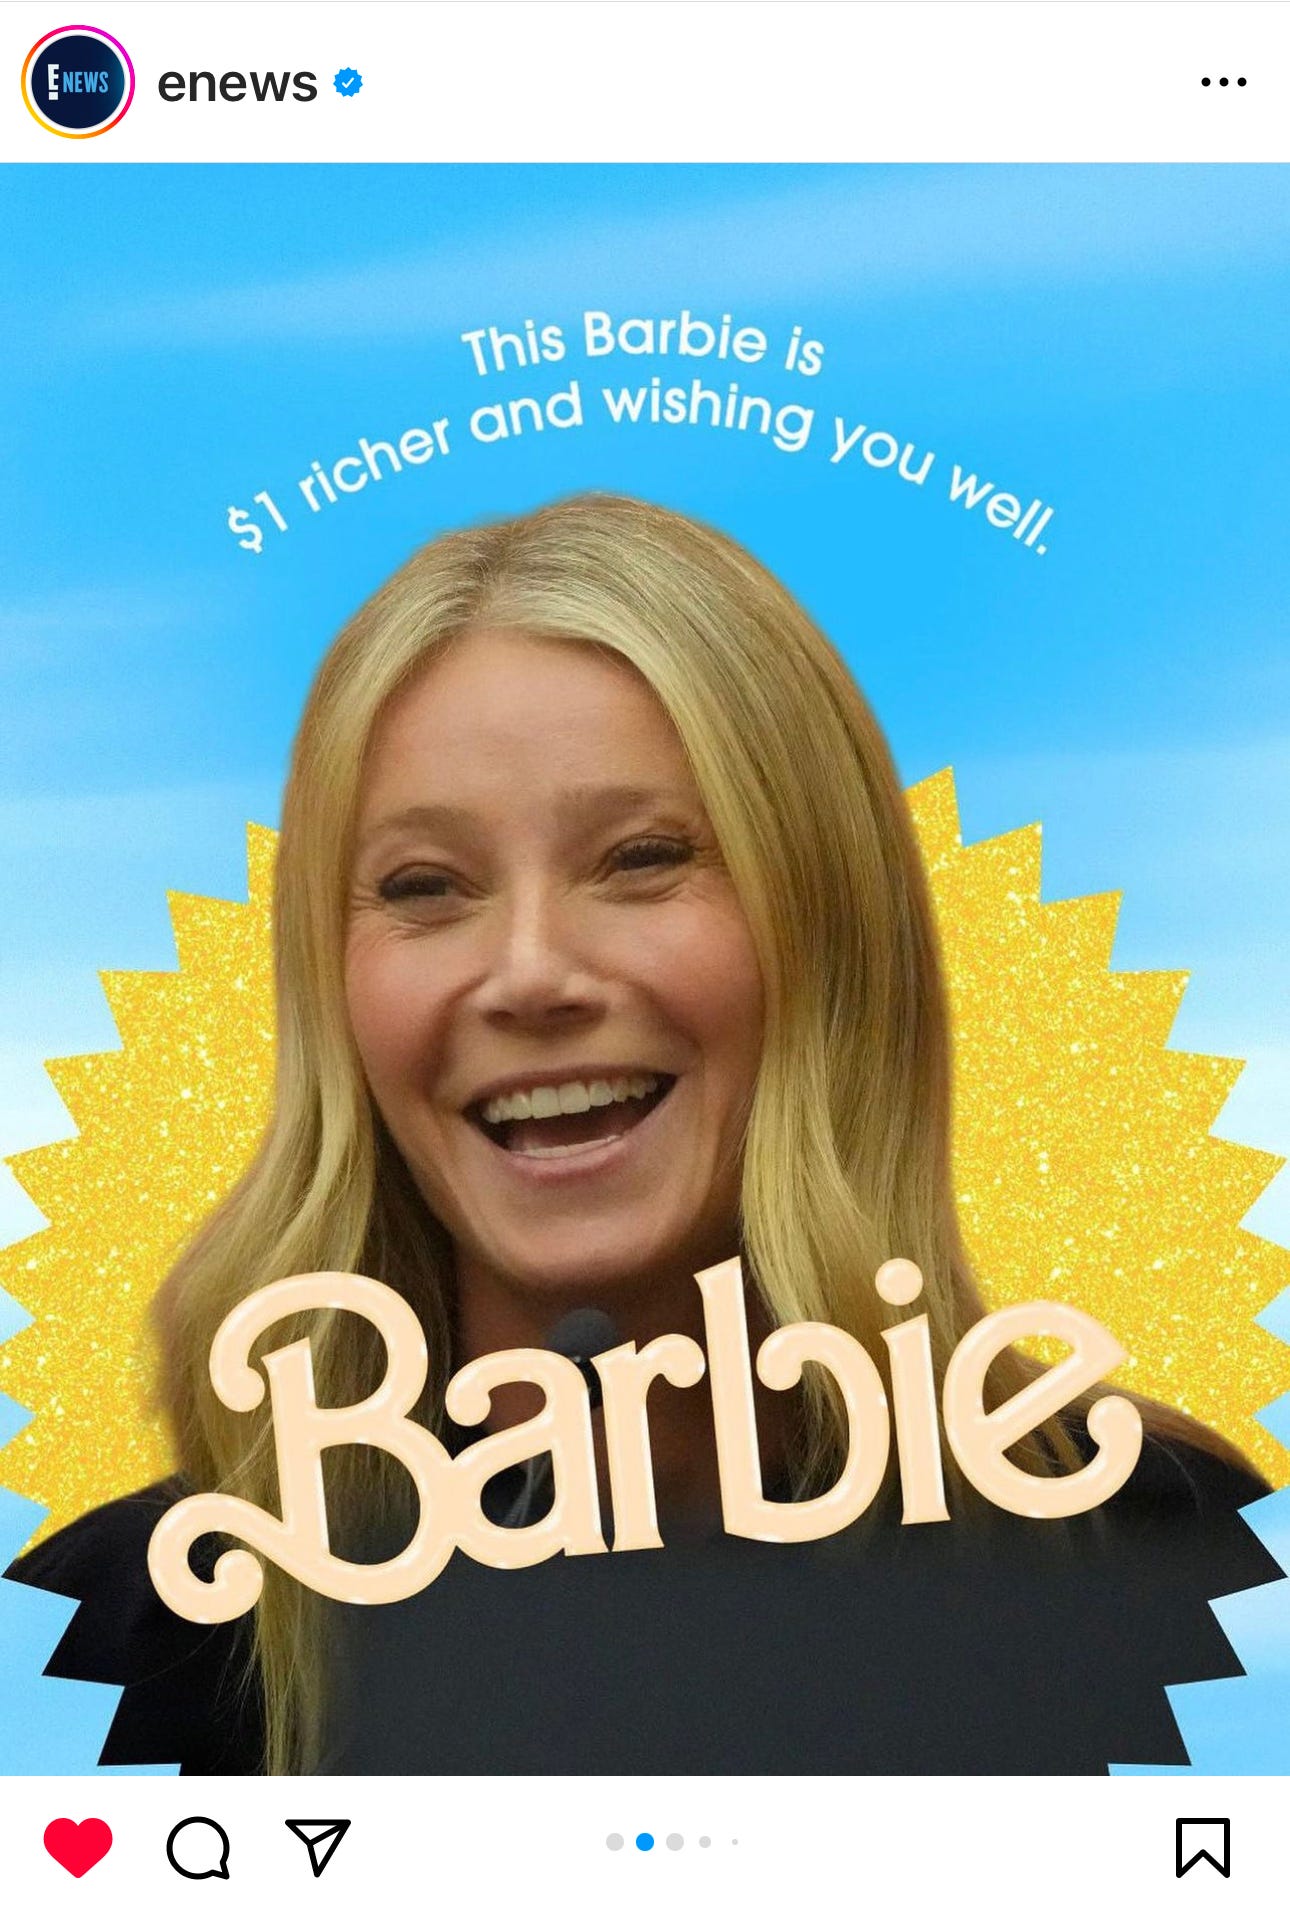 E! News takes on the Barbie movie meme generator and the Gwynth Paltrow court case in one image that says This Barbie is $1 richer and wishing you well